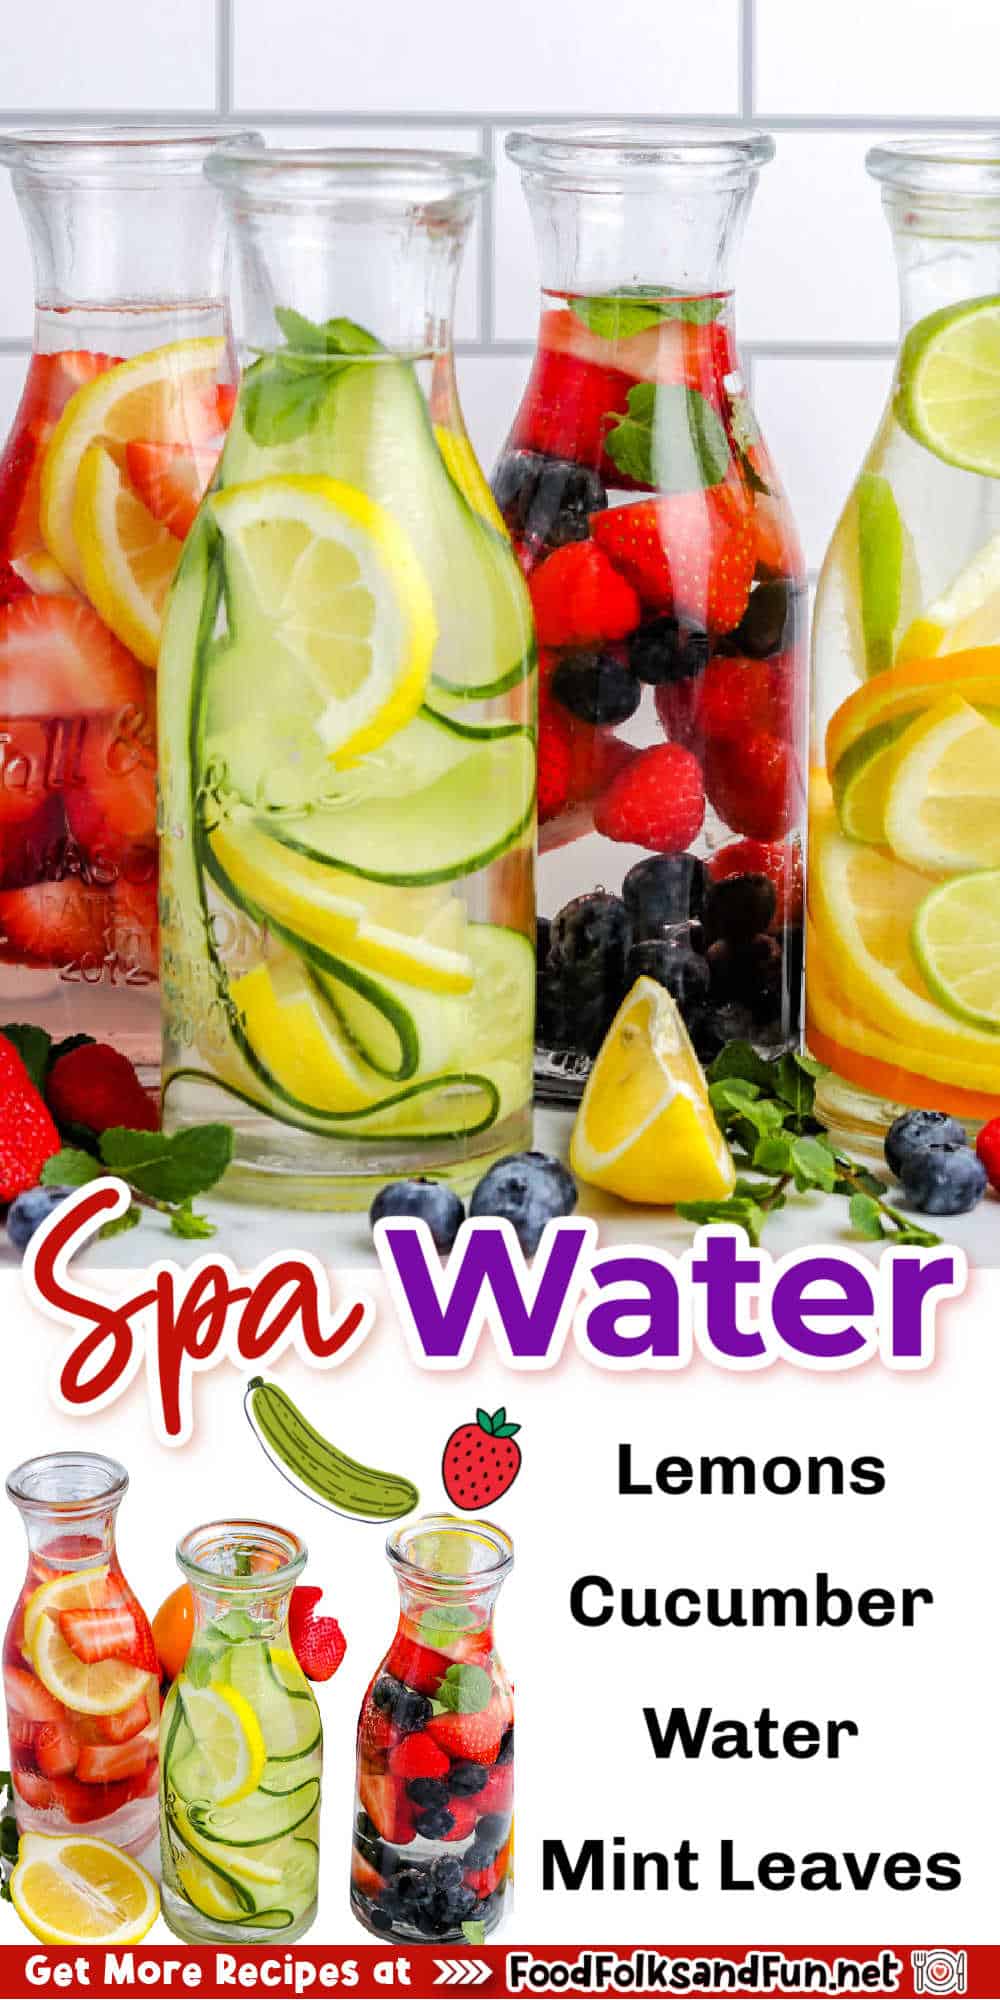 Refresh and rejuvenate with this spa water recipe. Infused with natural flavors, it's the perfect way to stay hydrated and pamper yourself.
 via @foodfolksandfun